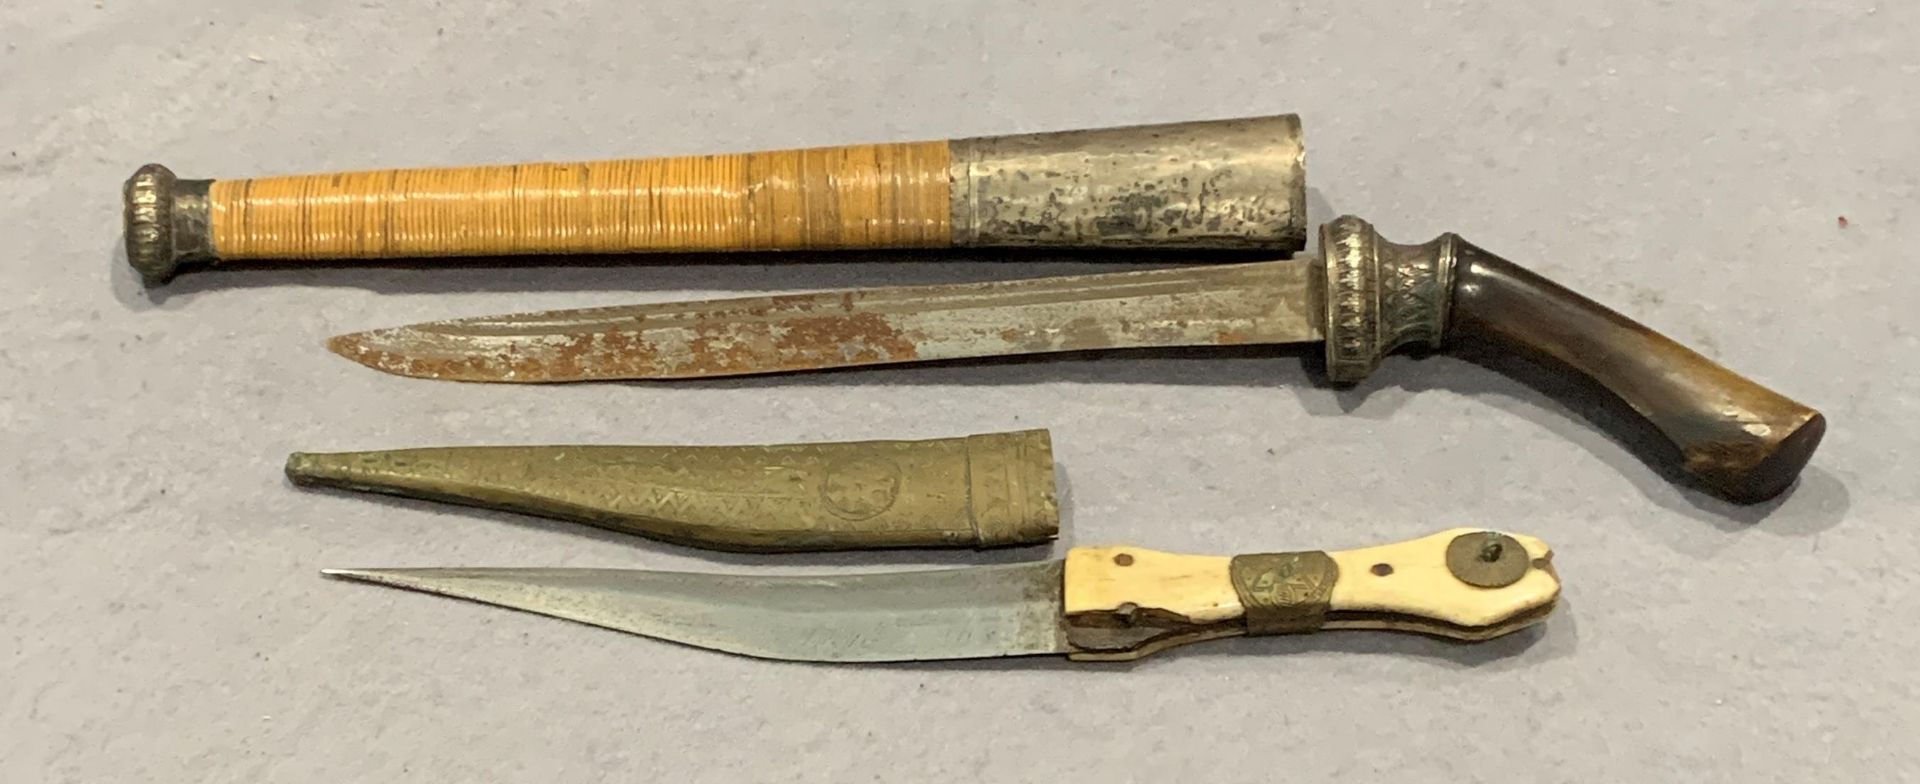 Two oriental style knives, one with 25cm blade and the other with a 17cm blade, - Image 2 of 4